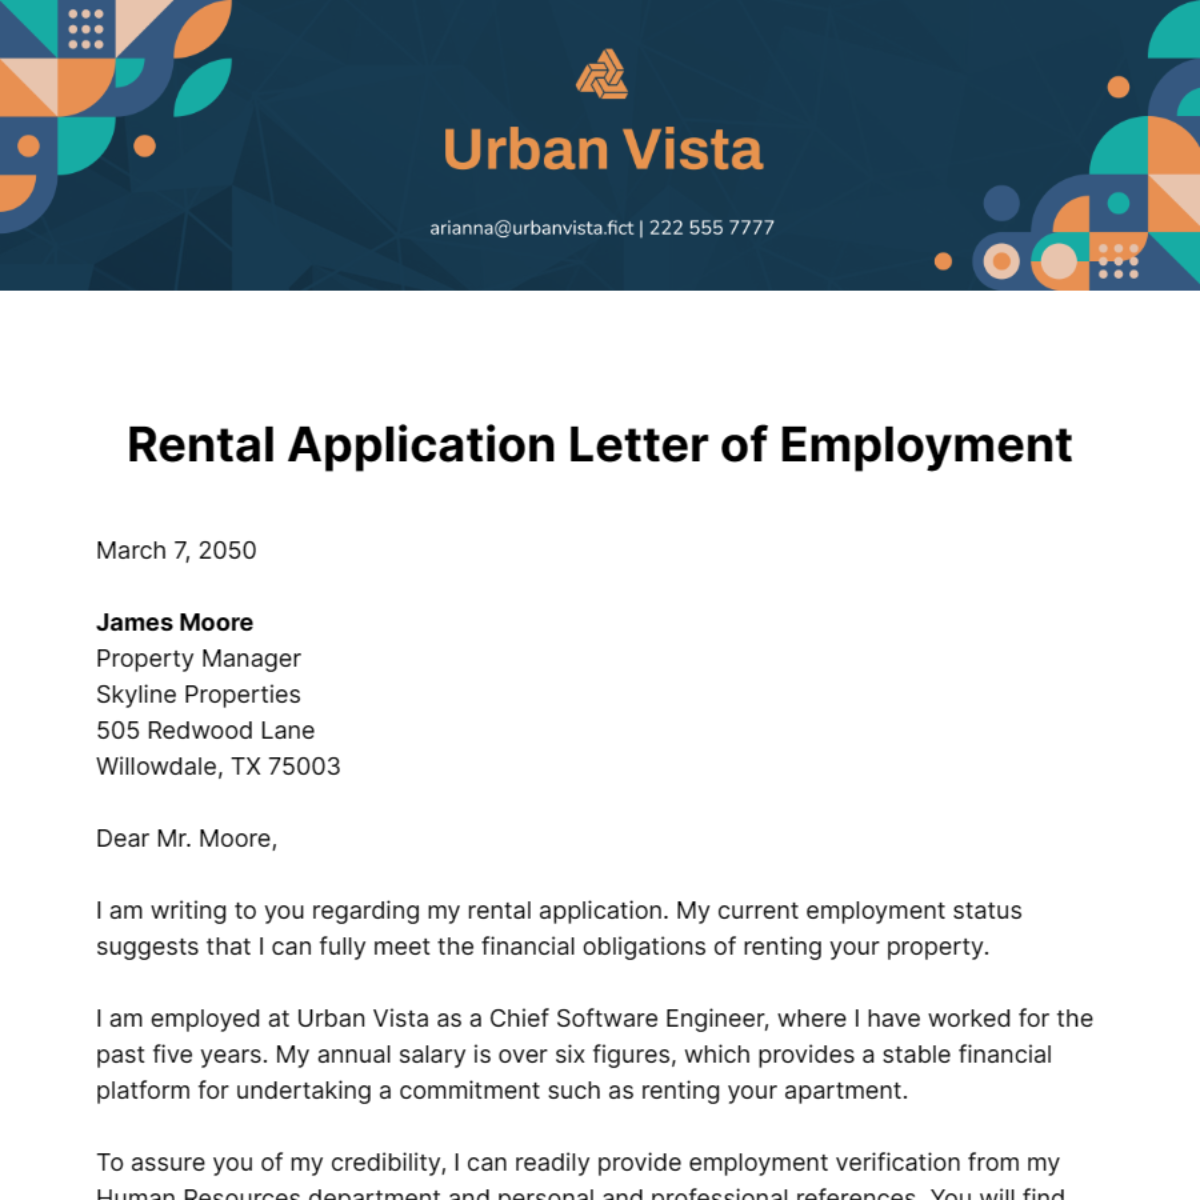 Rental Application Letter of Employment Template